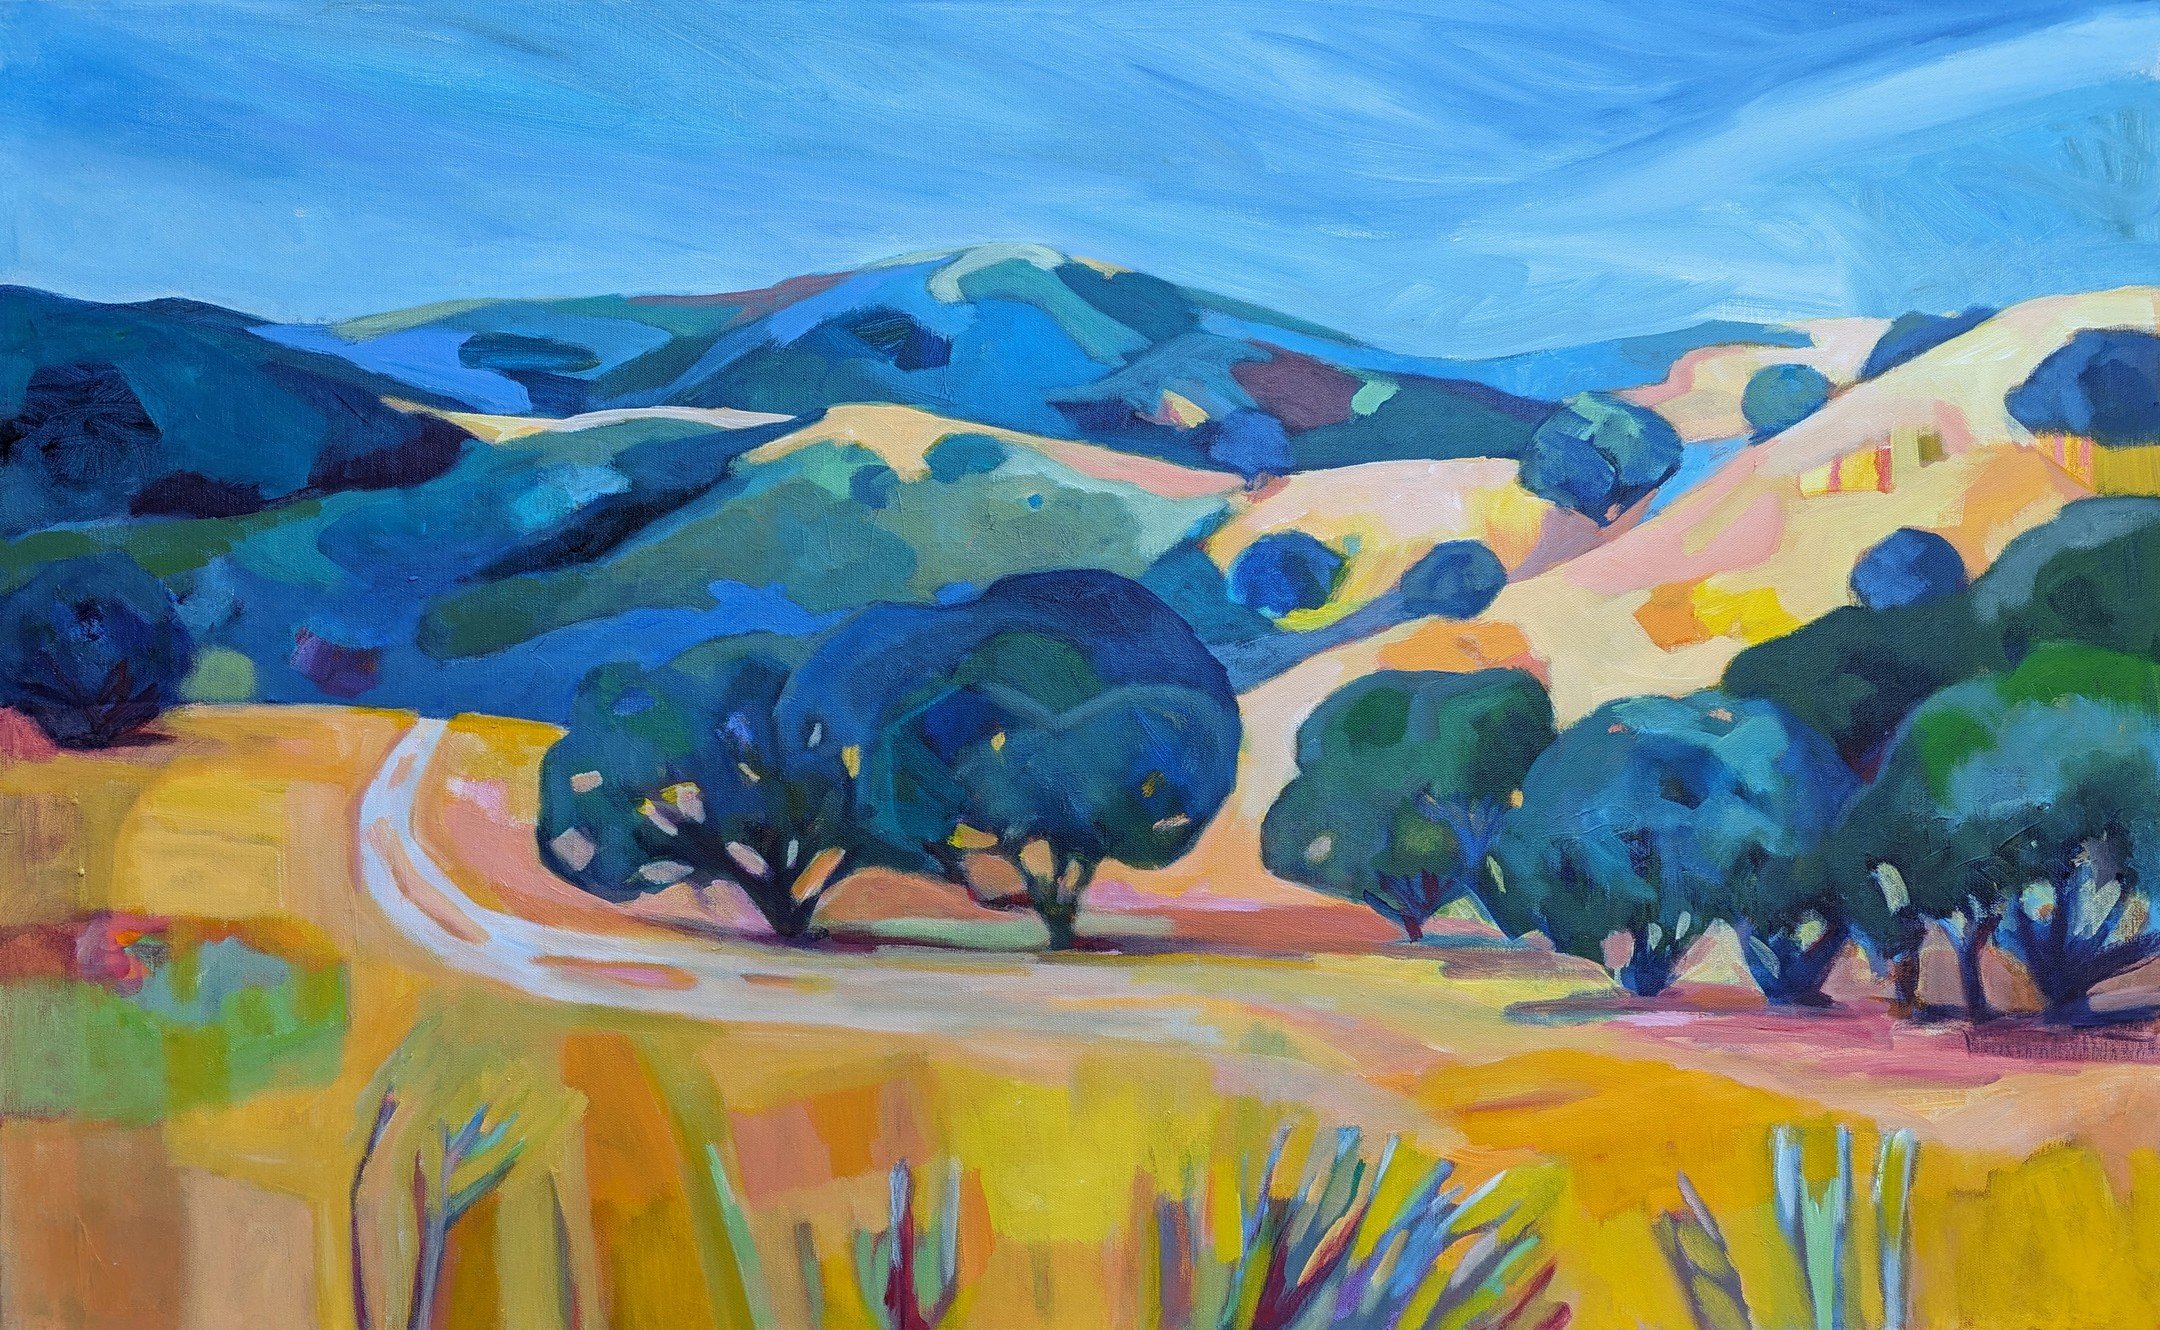 Country Road
Acrylic on Canvas
30&quot;x48&quot;

#landscapepainting #californialandscape #oakpainting #californiaart #stephaniemacleanartist